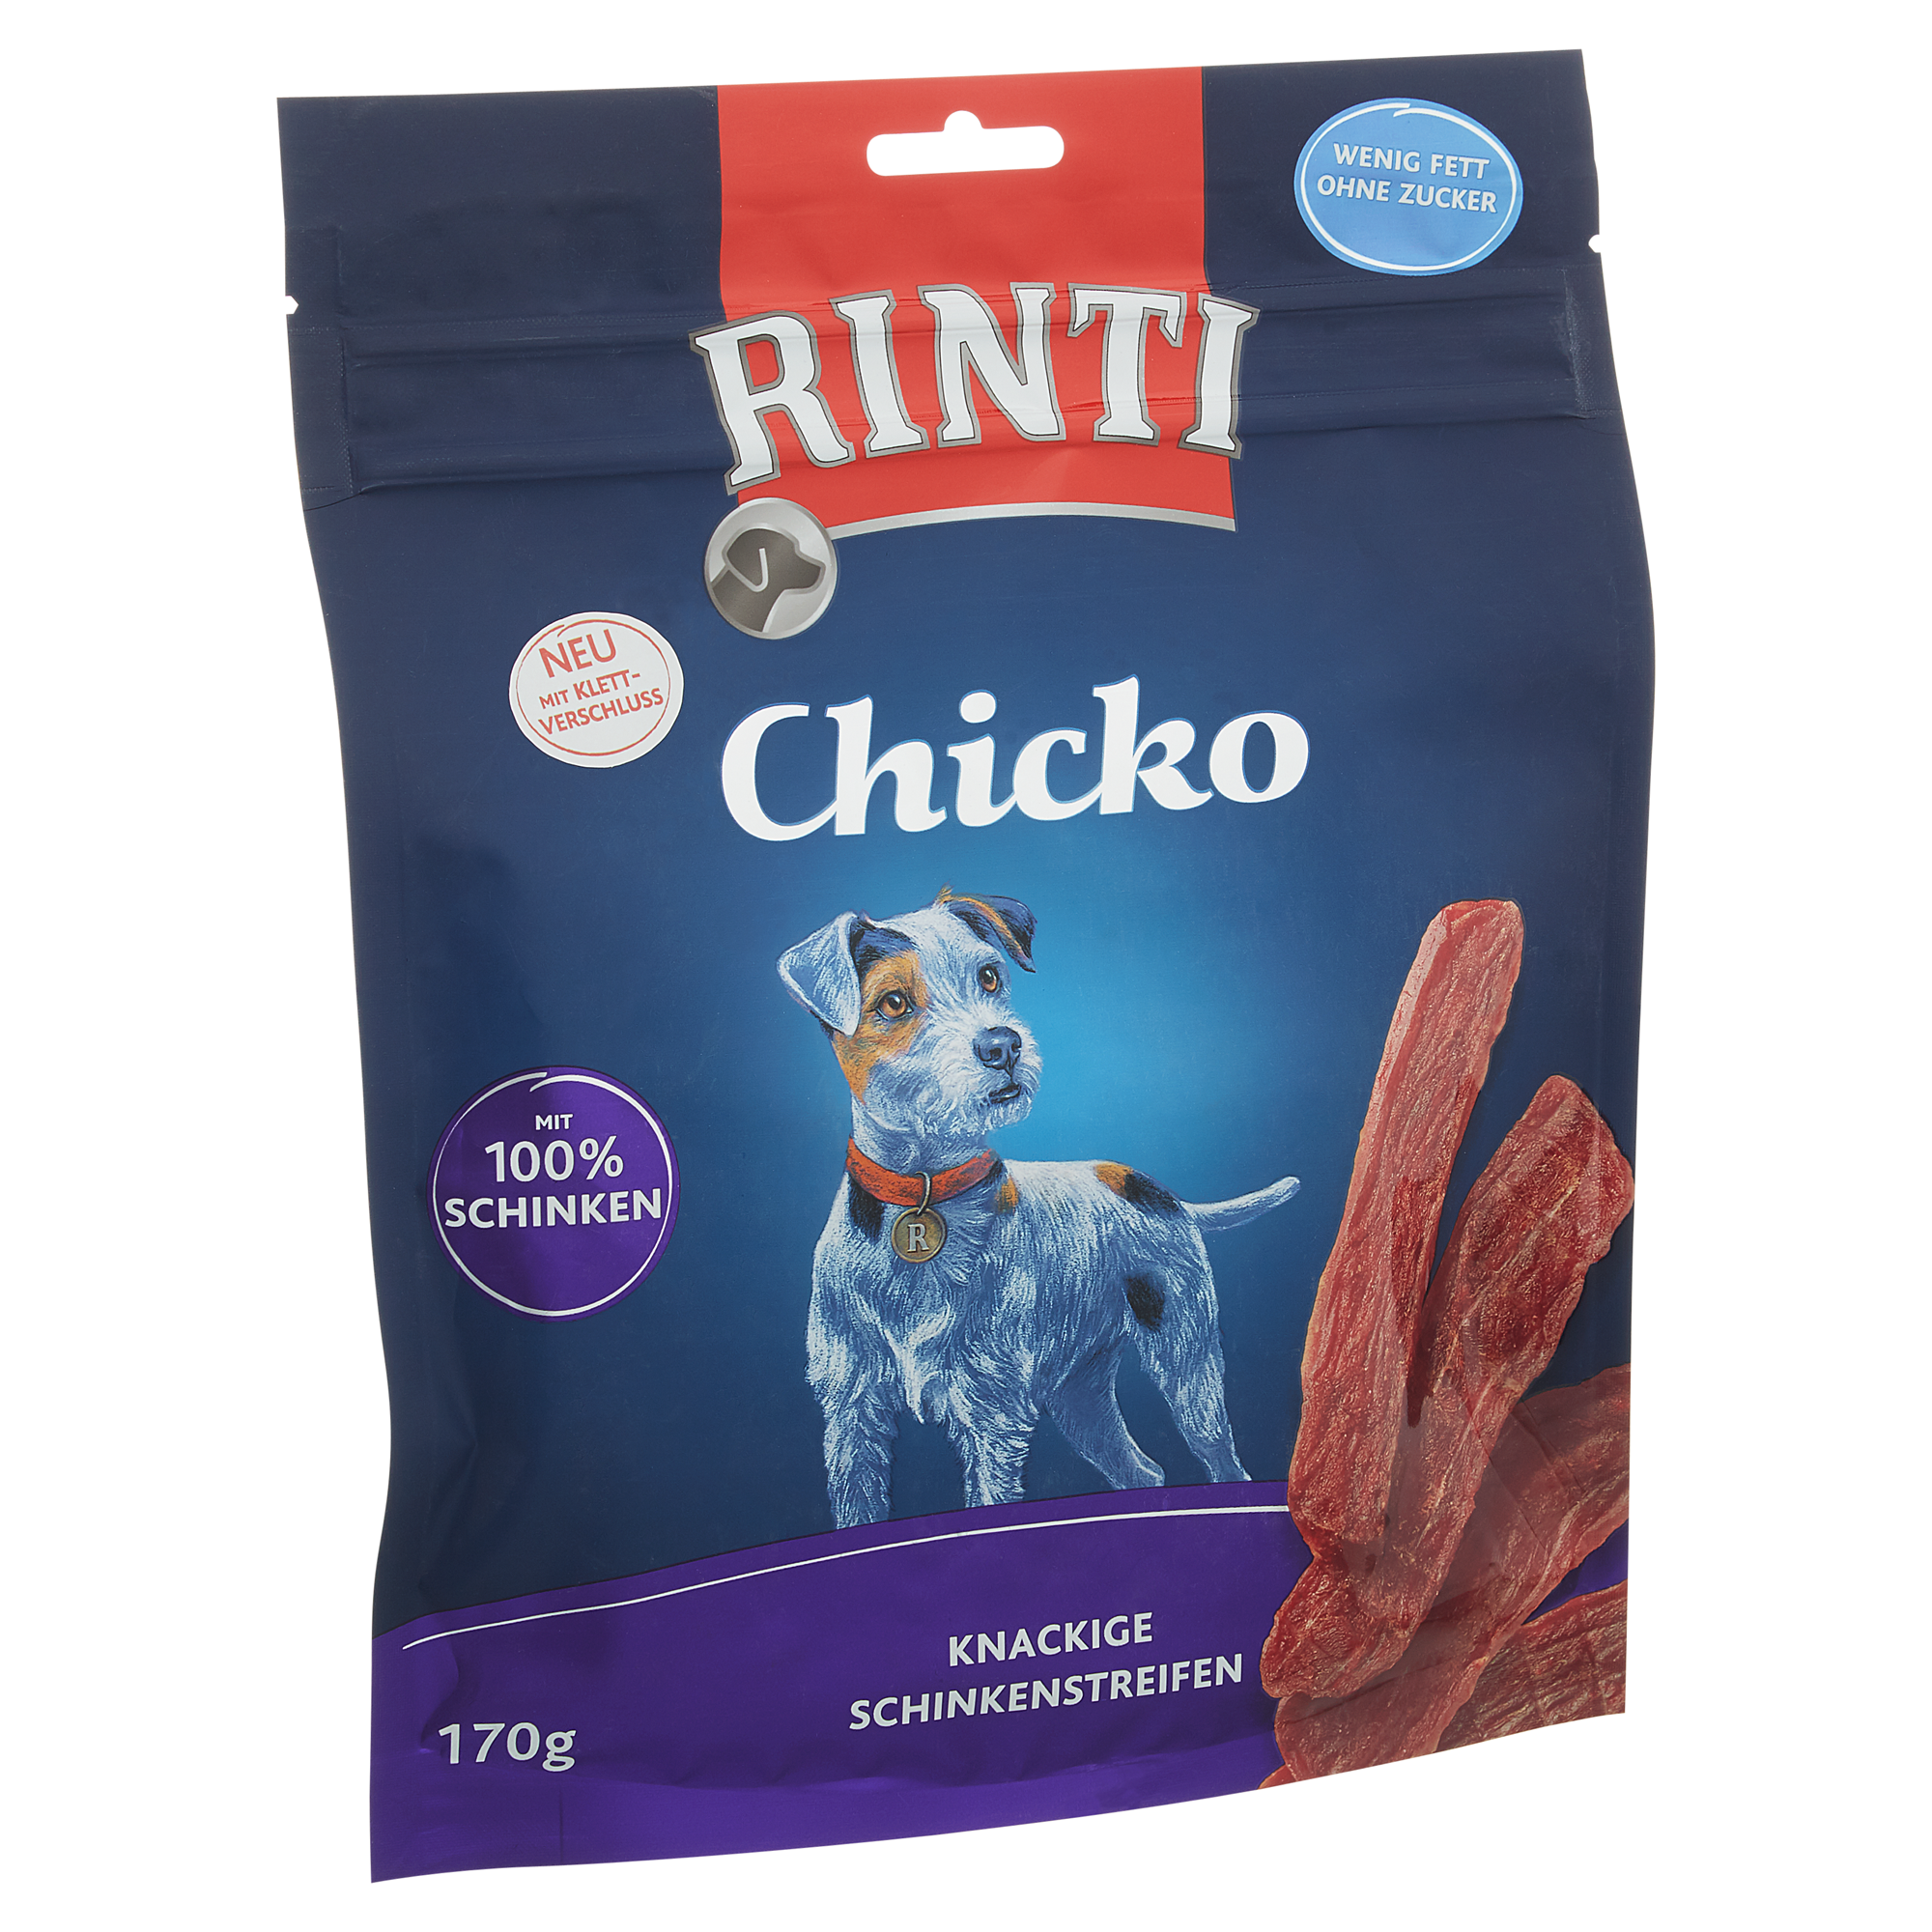 Hundesnack "Chicko" mit Schinken 170 g + product picture